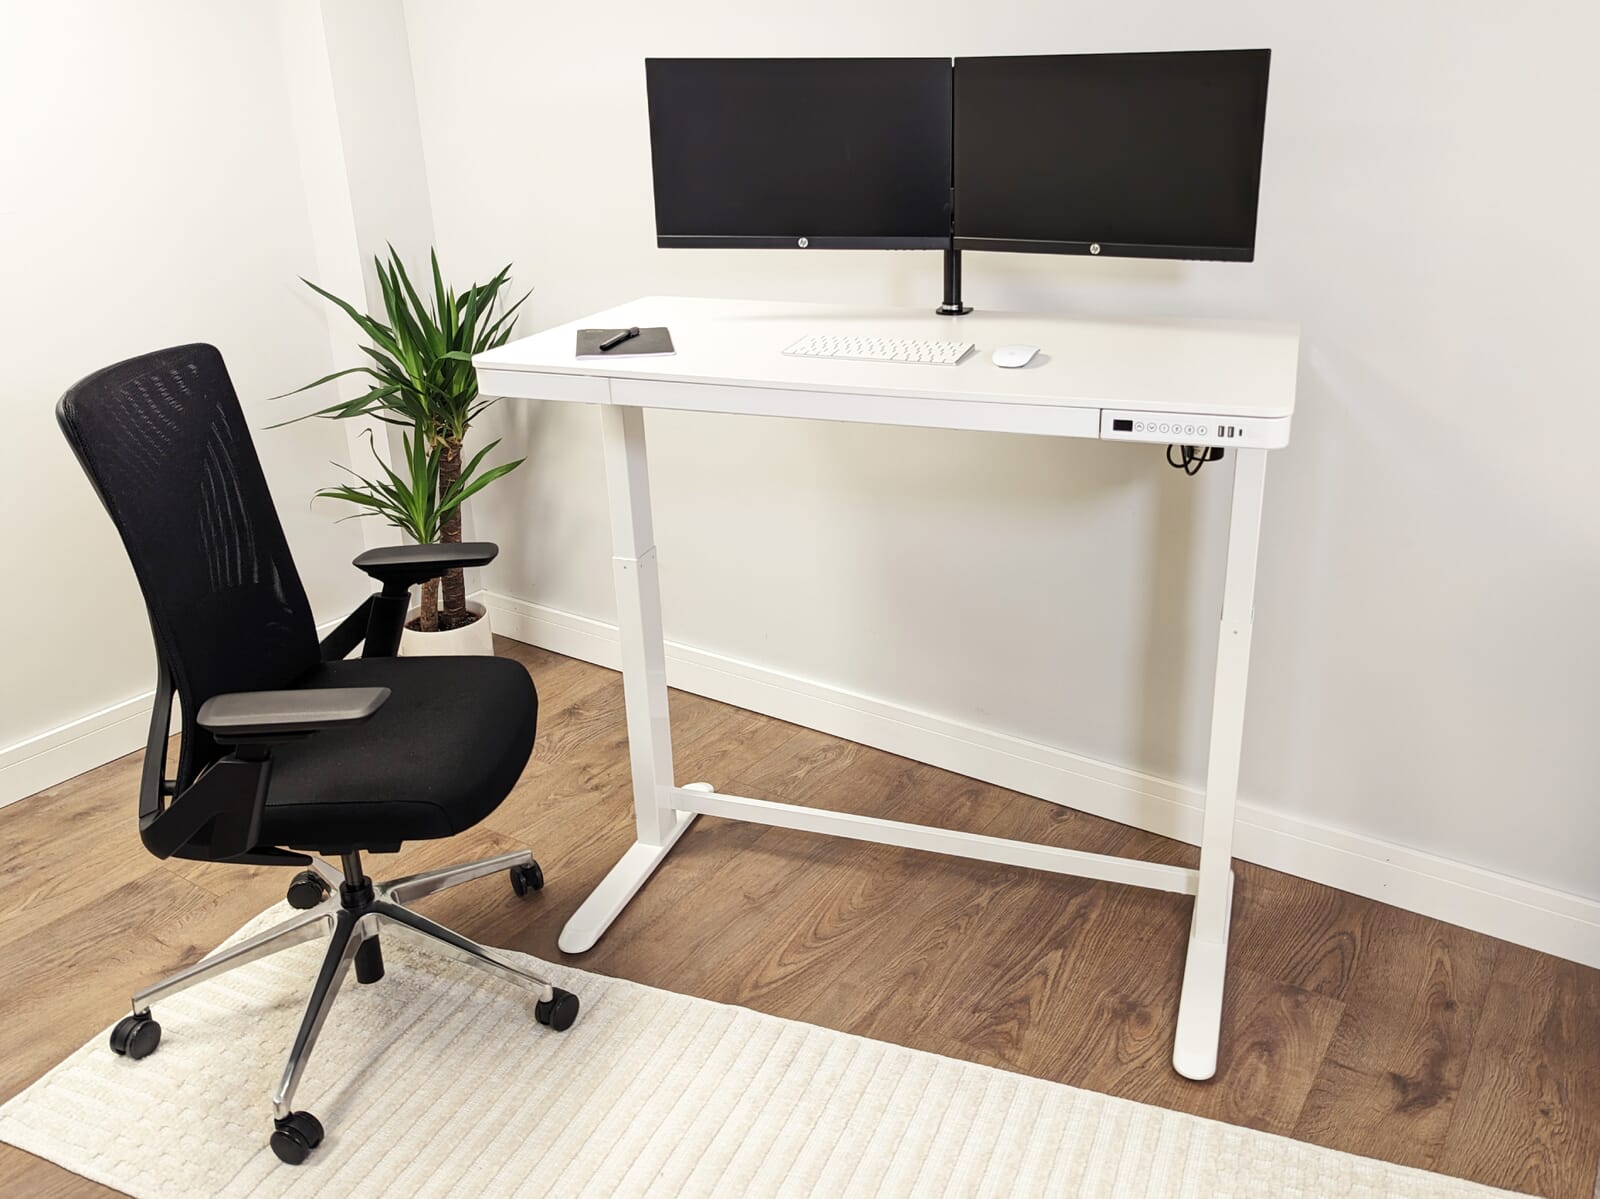 The Jupiter MFC Desk in black is a modern height adjustable desk, designed to keep you moving whilst working from home.